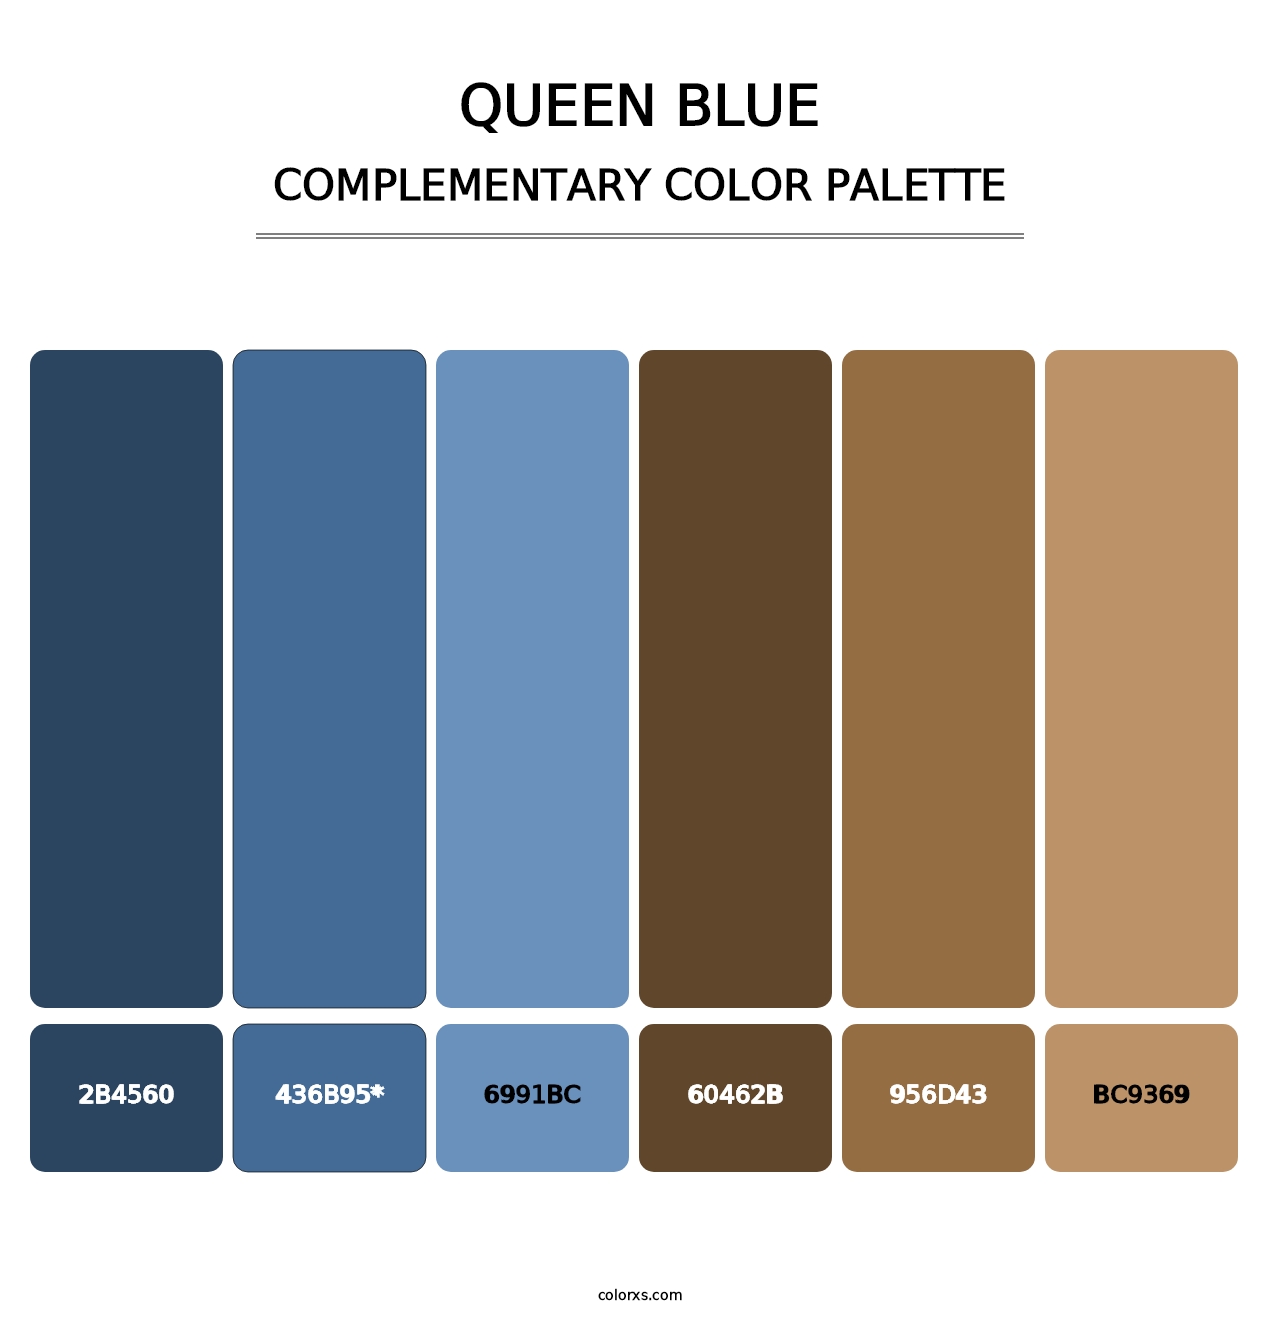 Queen Blue - Complementary Color Palette